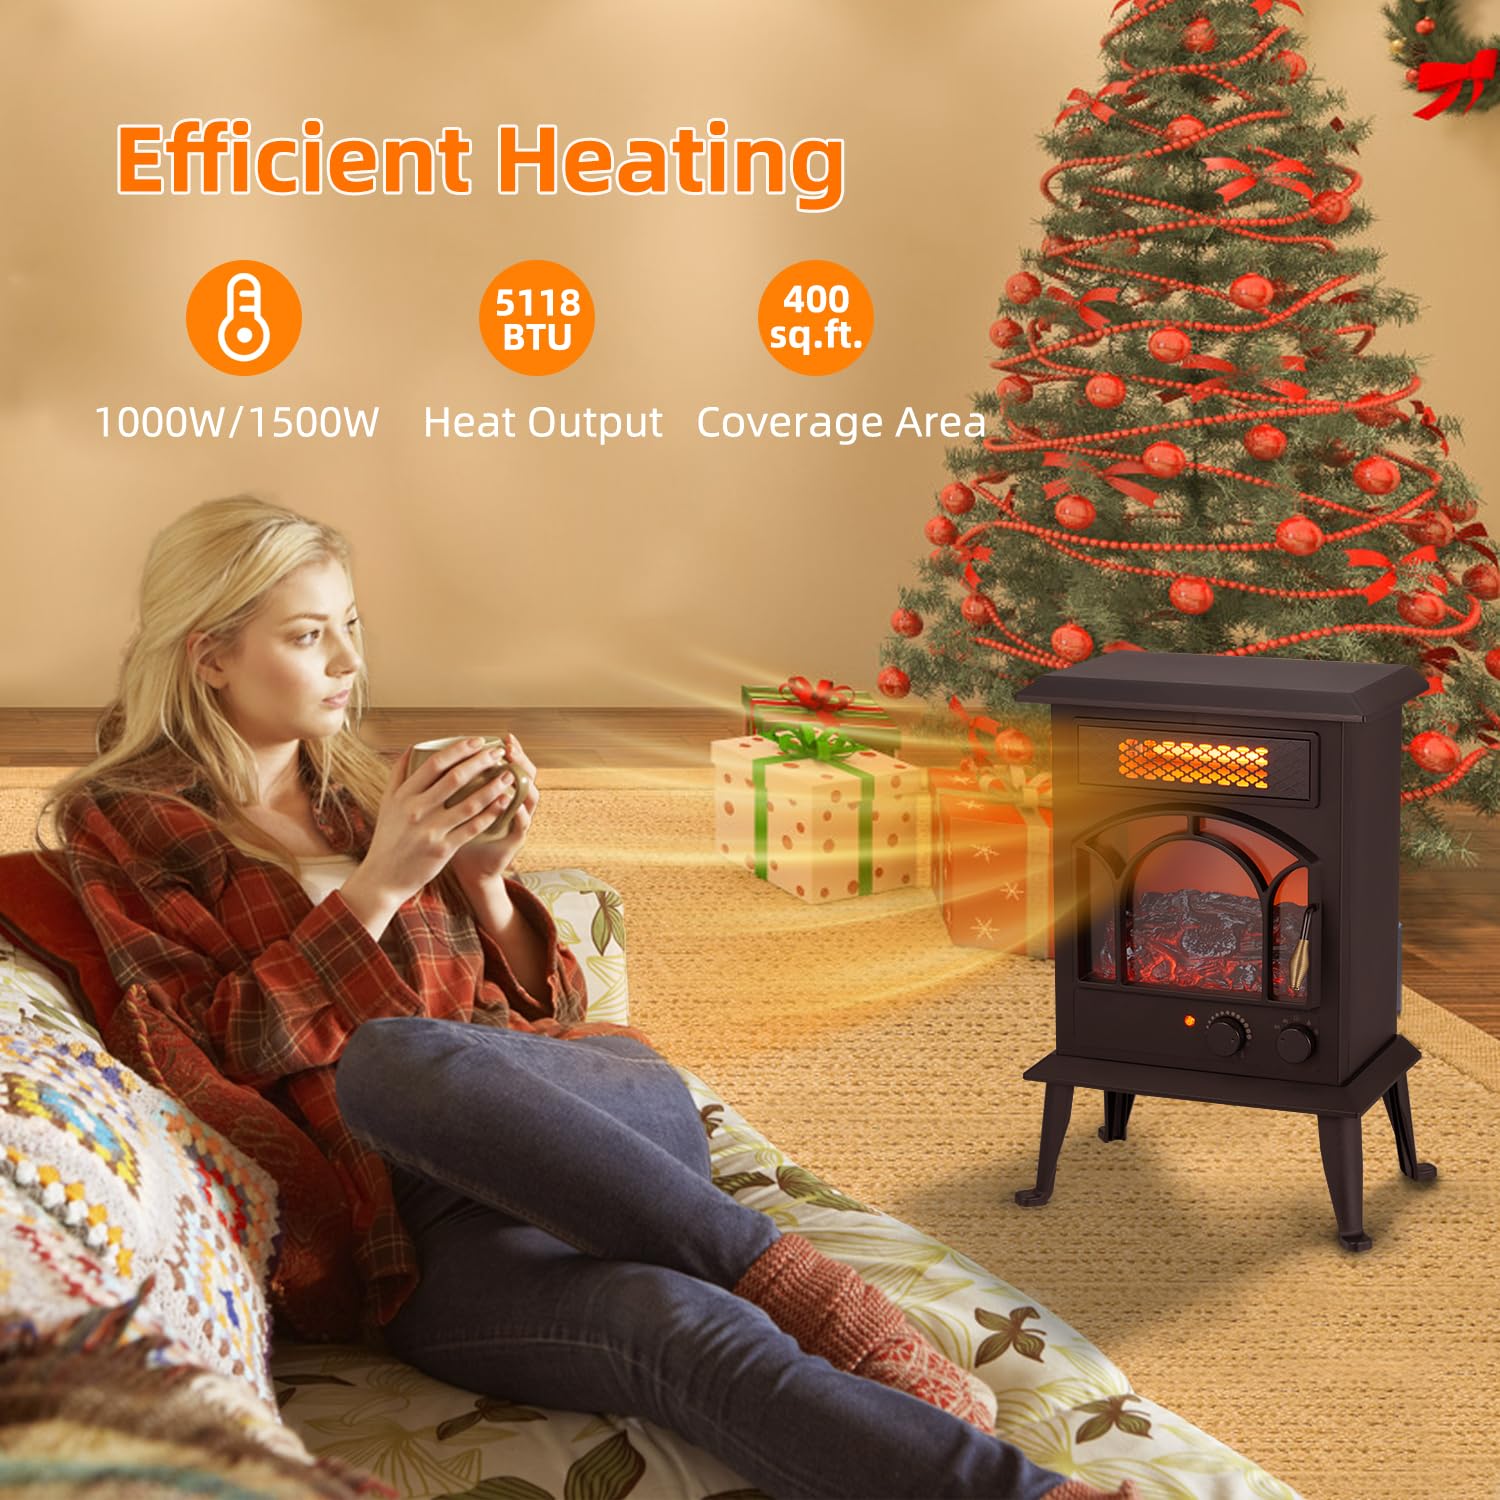 WEWARM Electric Fireplace Heater, 22.4" Freestanding Infrared Fireplace Heater for Indoor Use with Realistic Flame Effect, Overheating Safety Protection Stove Space Heater 1500W